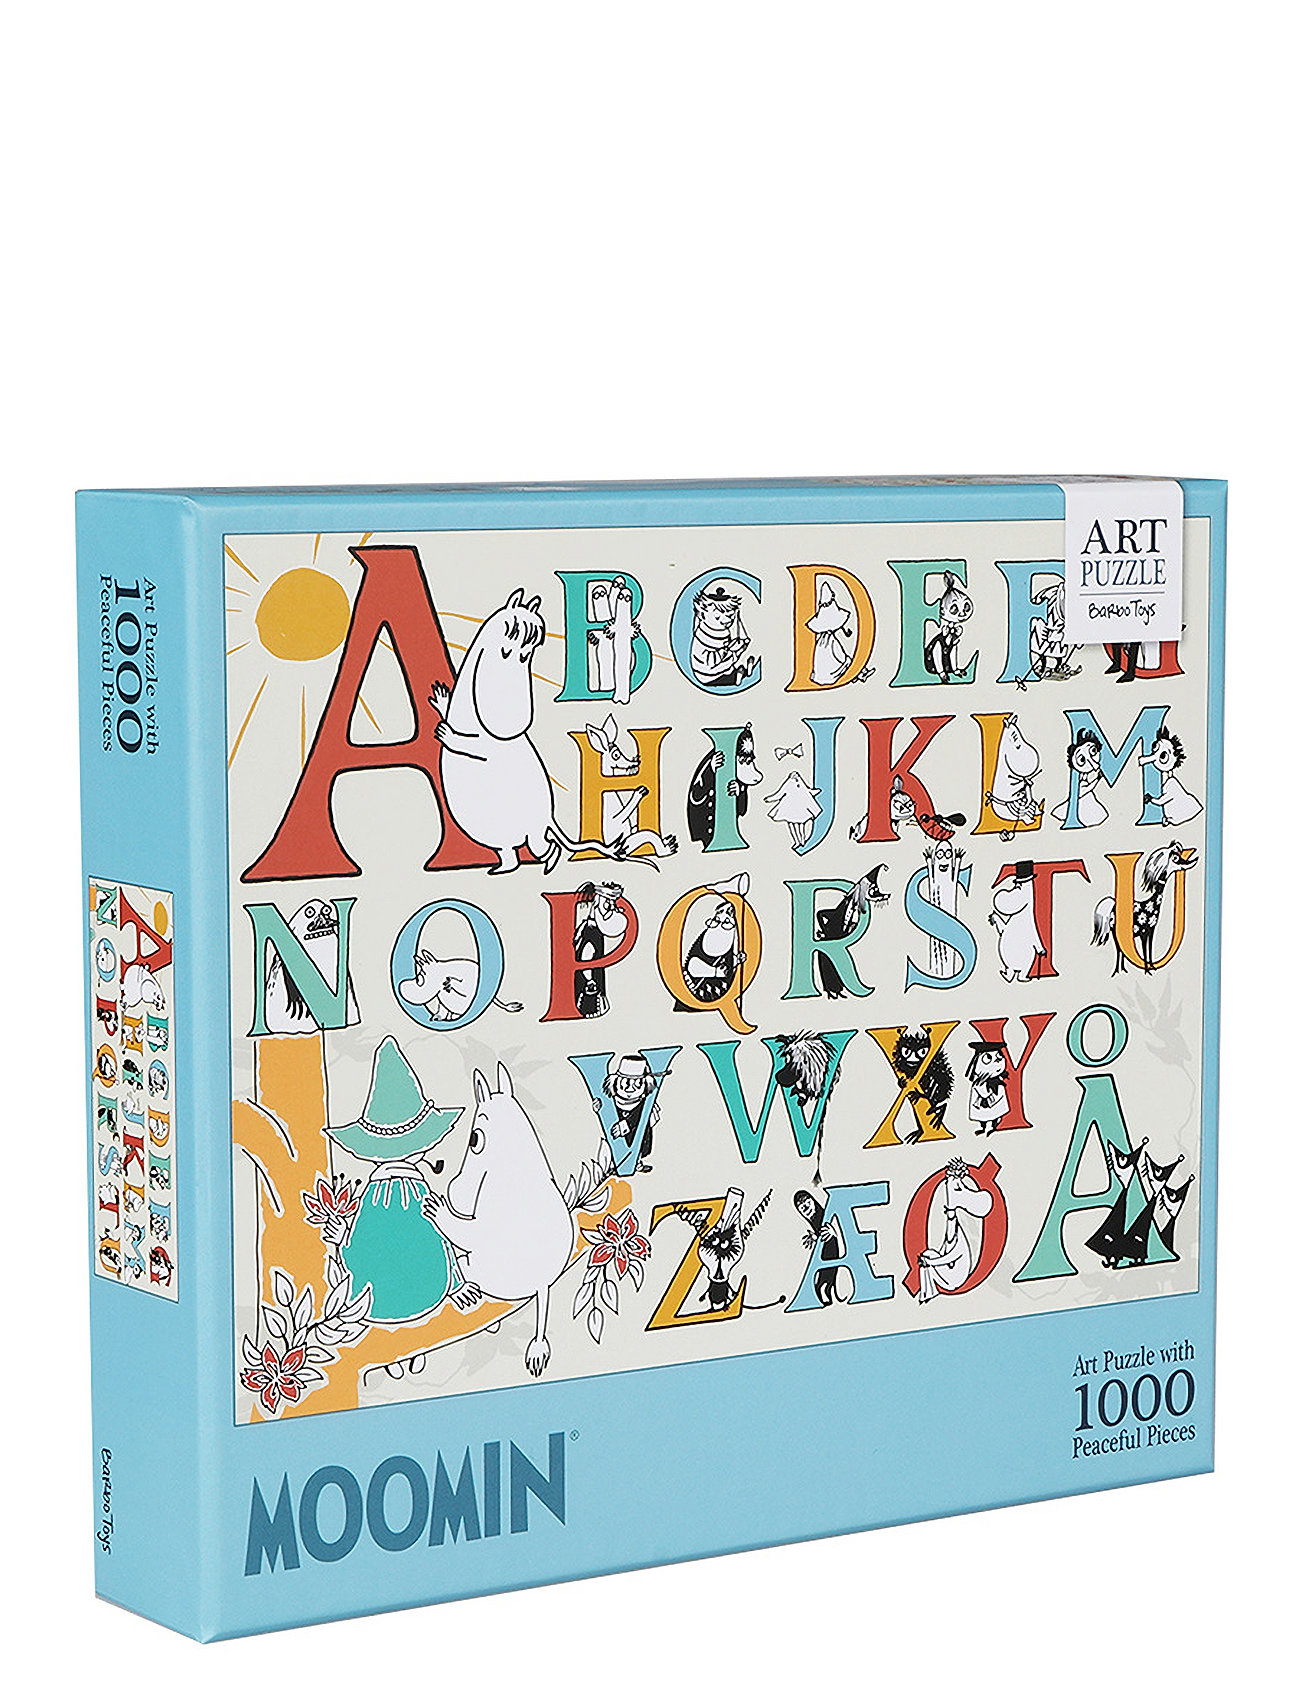 Mumutrolden Abc Puslespil 1000 Brikker Toys Puzzles And Games Puzzles Pedagogical Puzzles Multi/patterned MUMIN